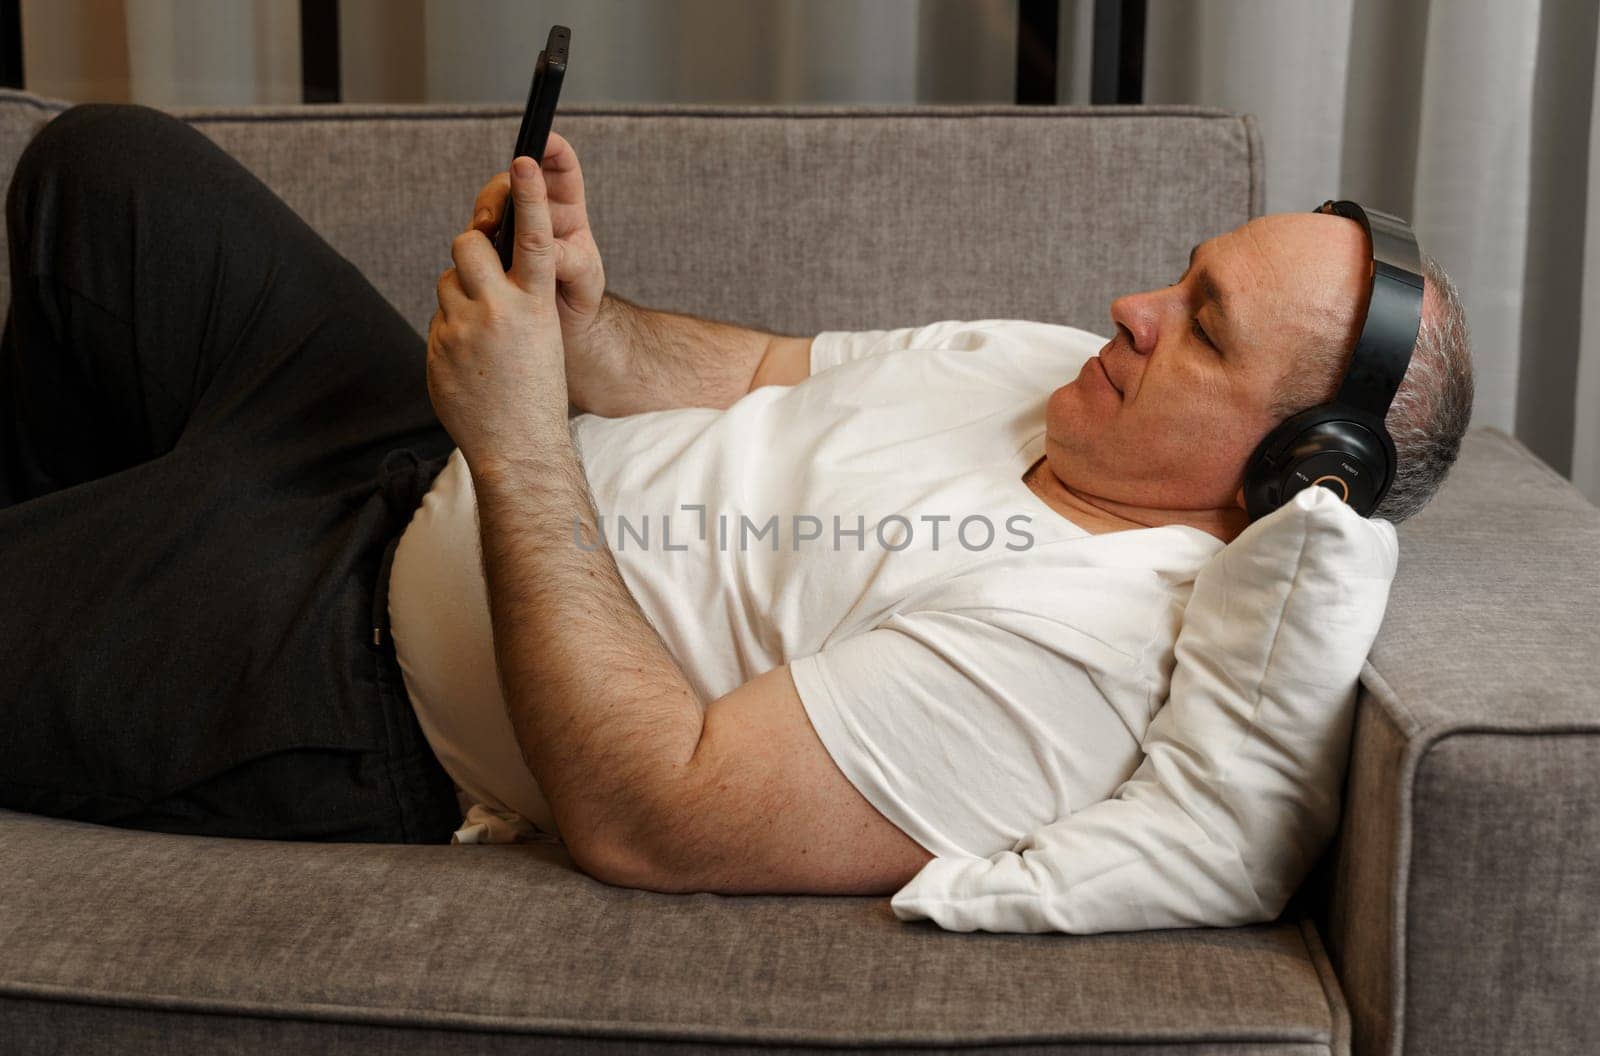 A middle-aged man lies on the couch, listens to music on headphones, looks at the phone.